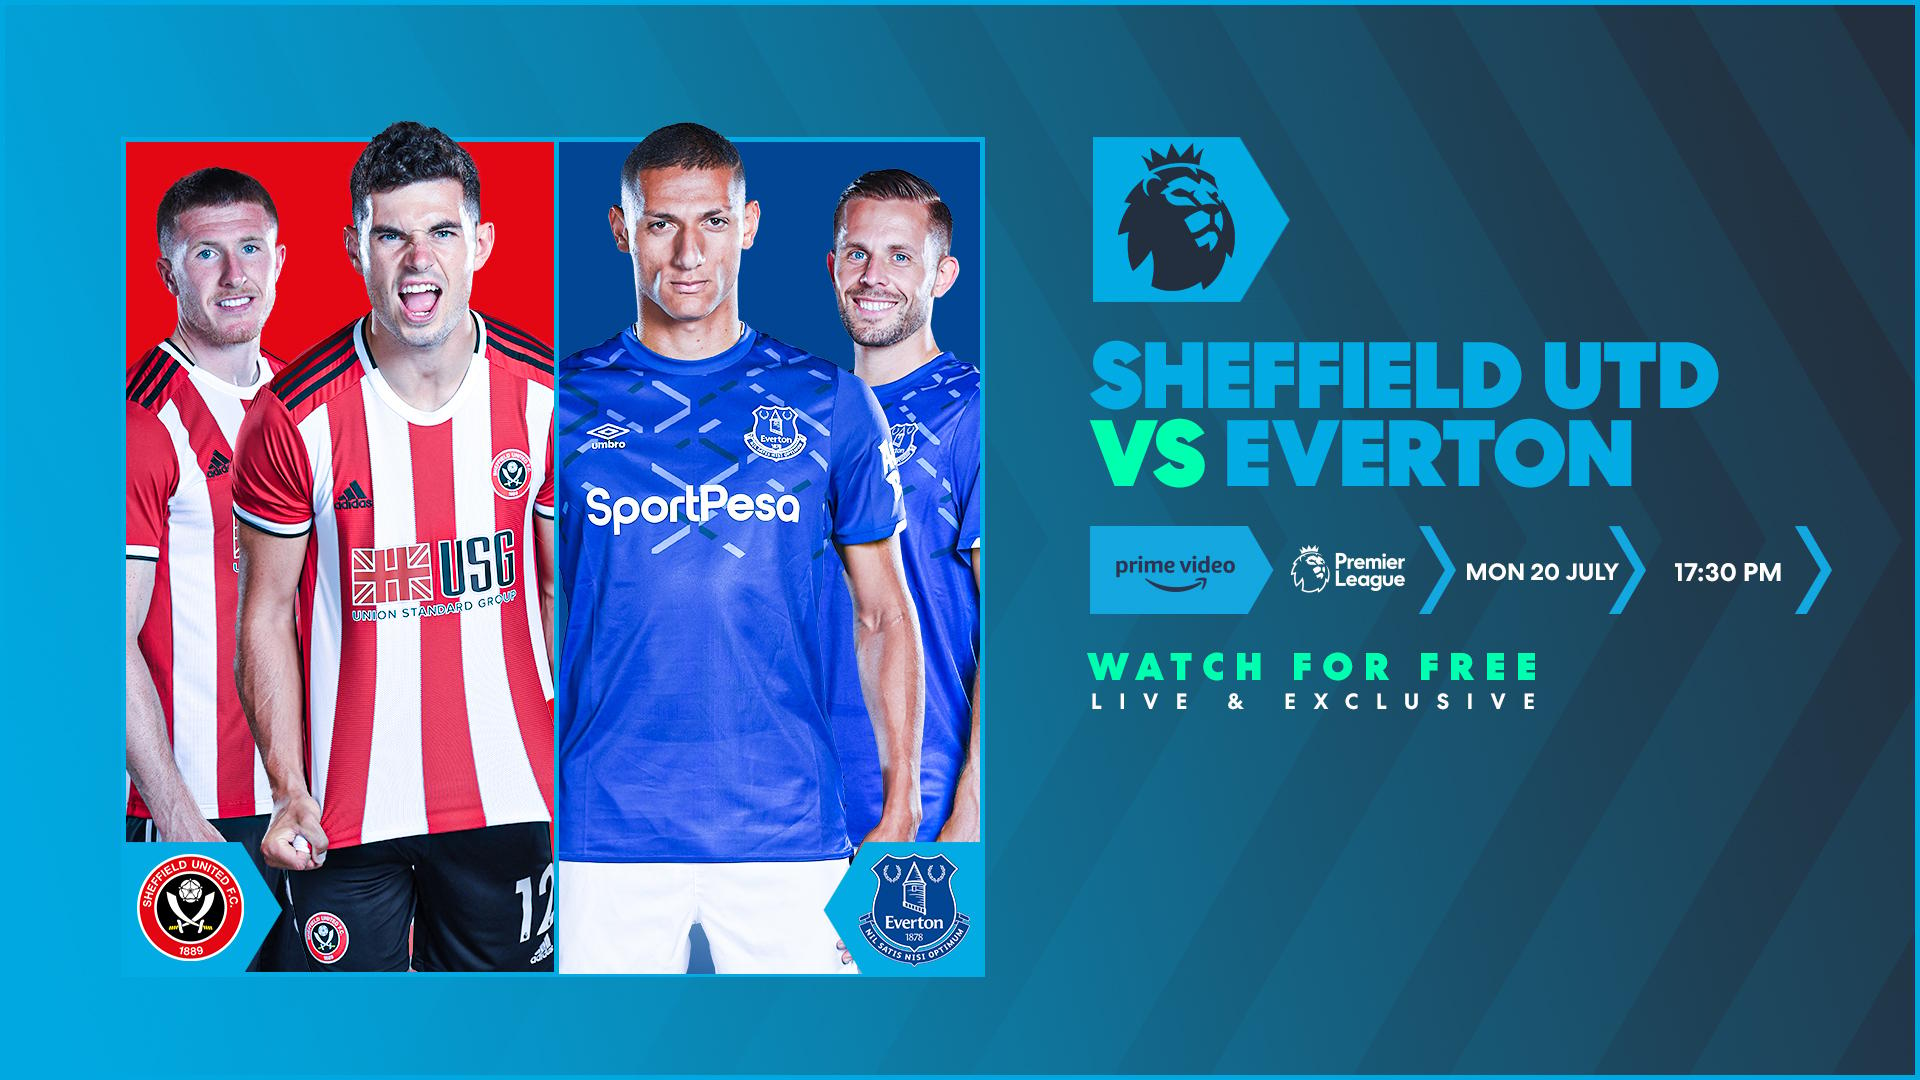 Sheffield United v Everton on Twitch and Amazon Prime Video